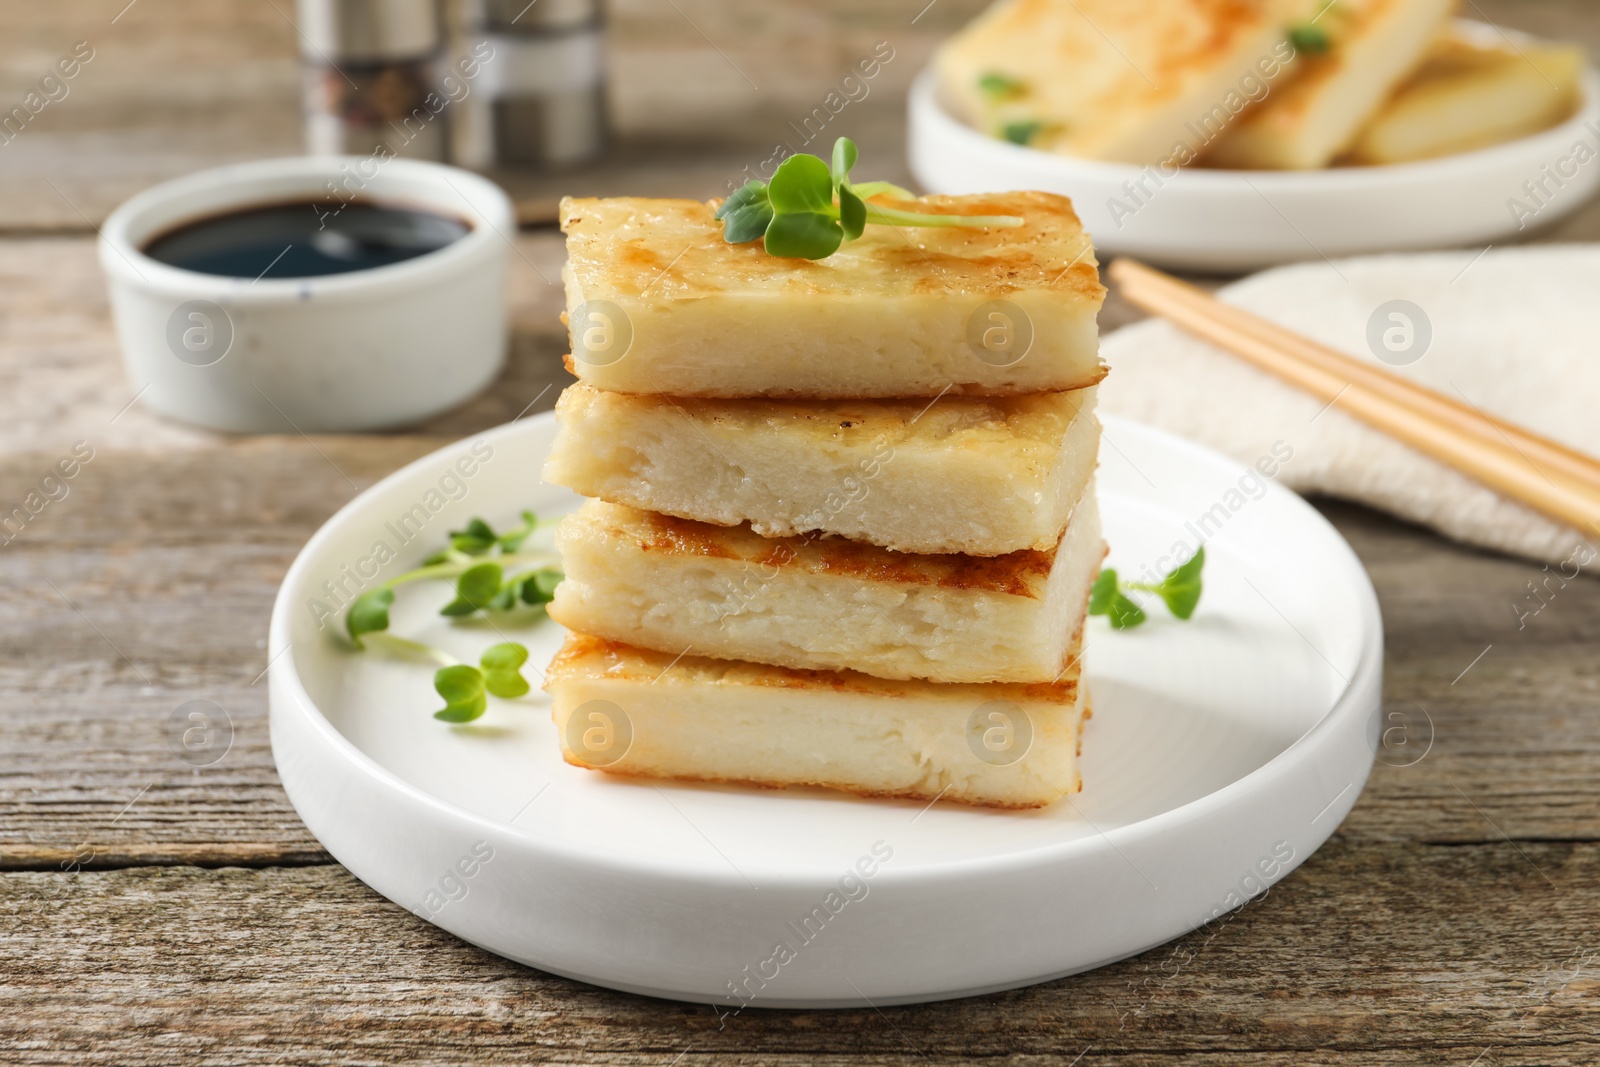 Photo of Delicious turnip cake with microgreens served on wooden table